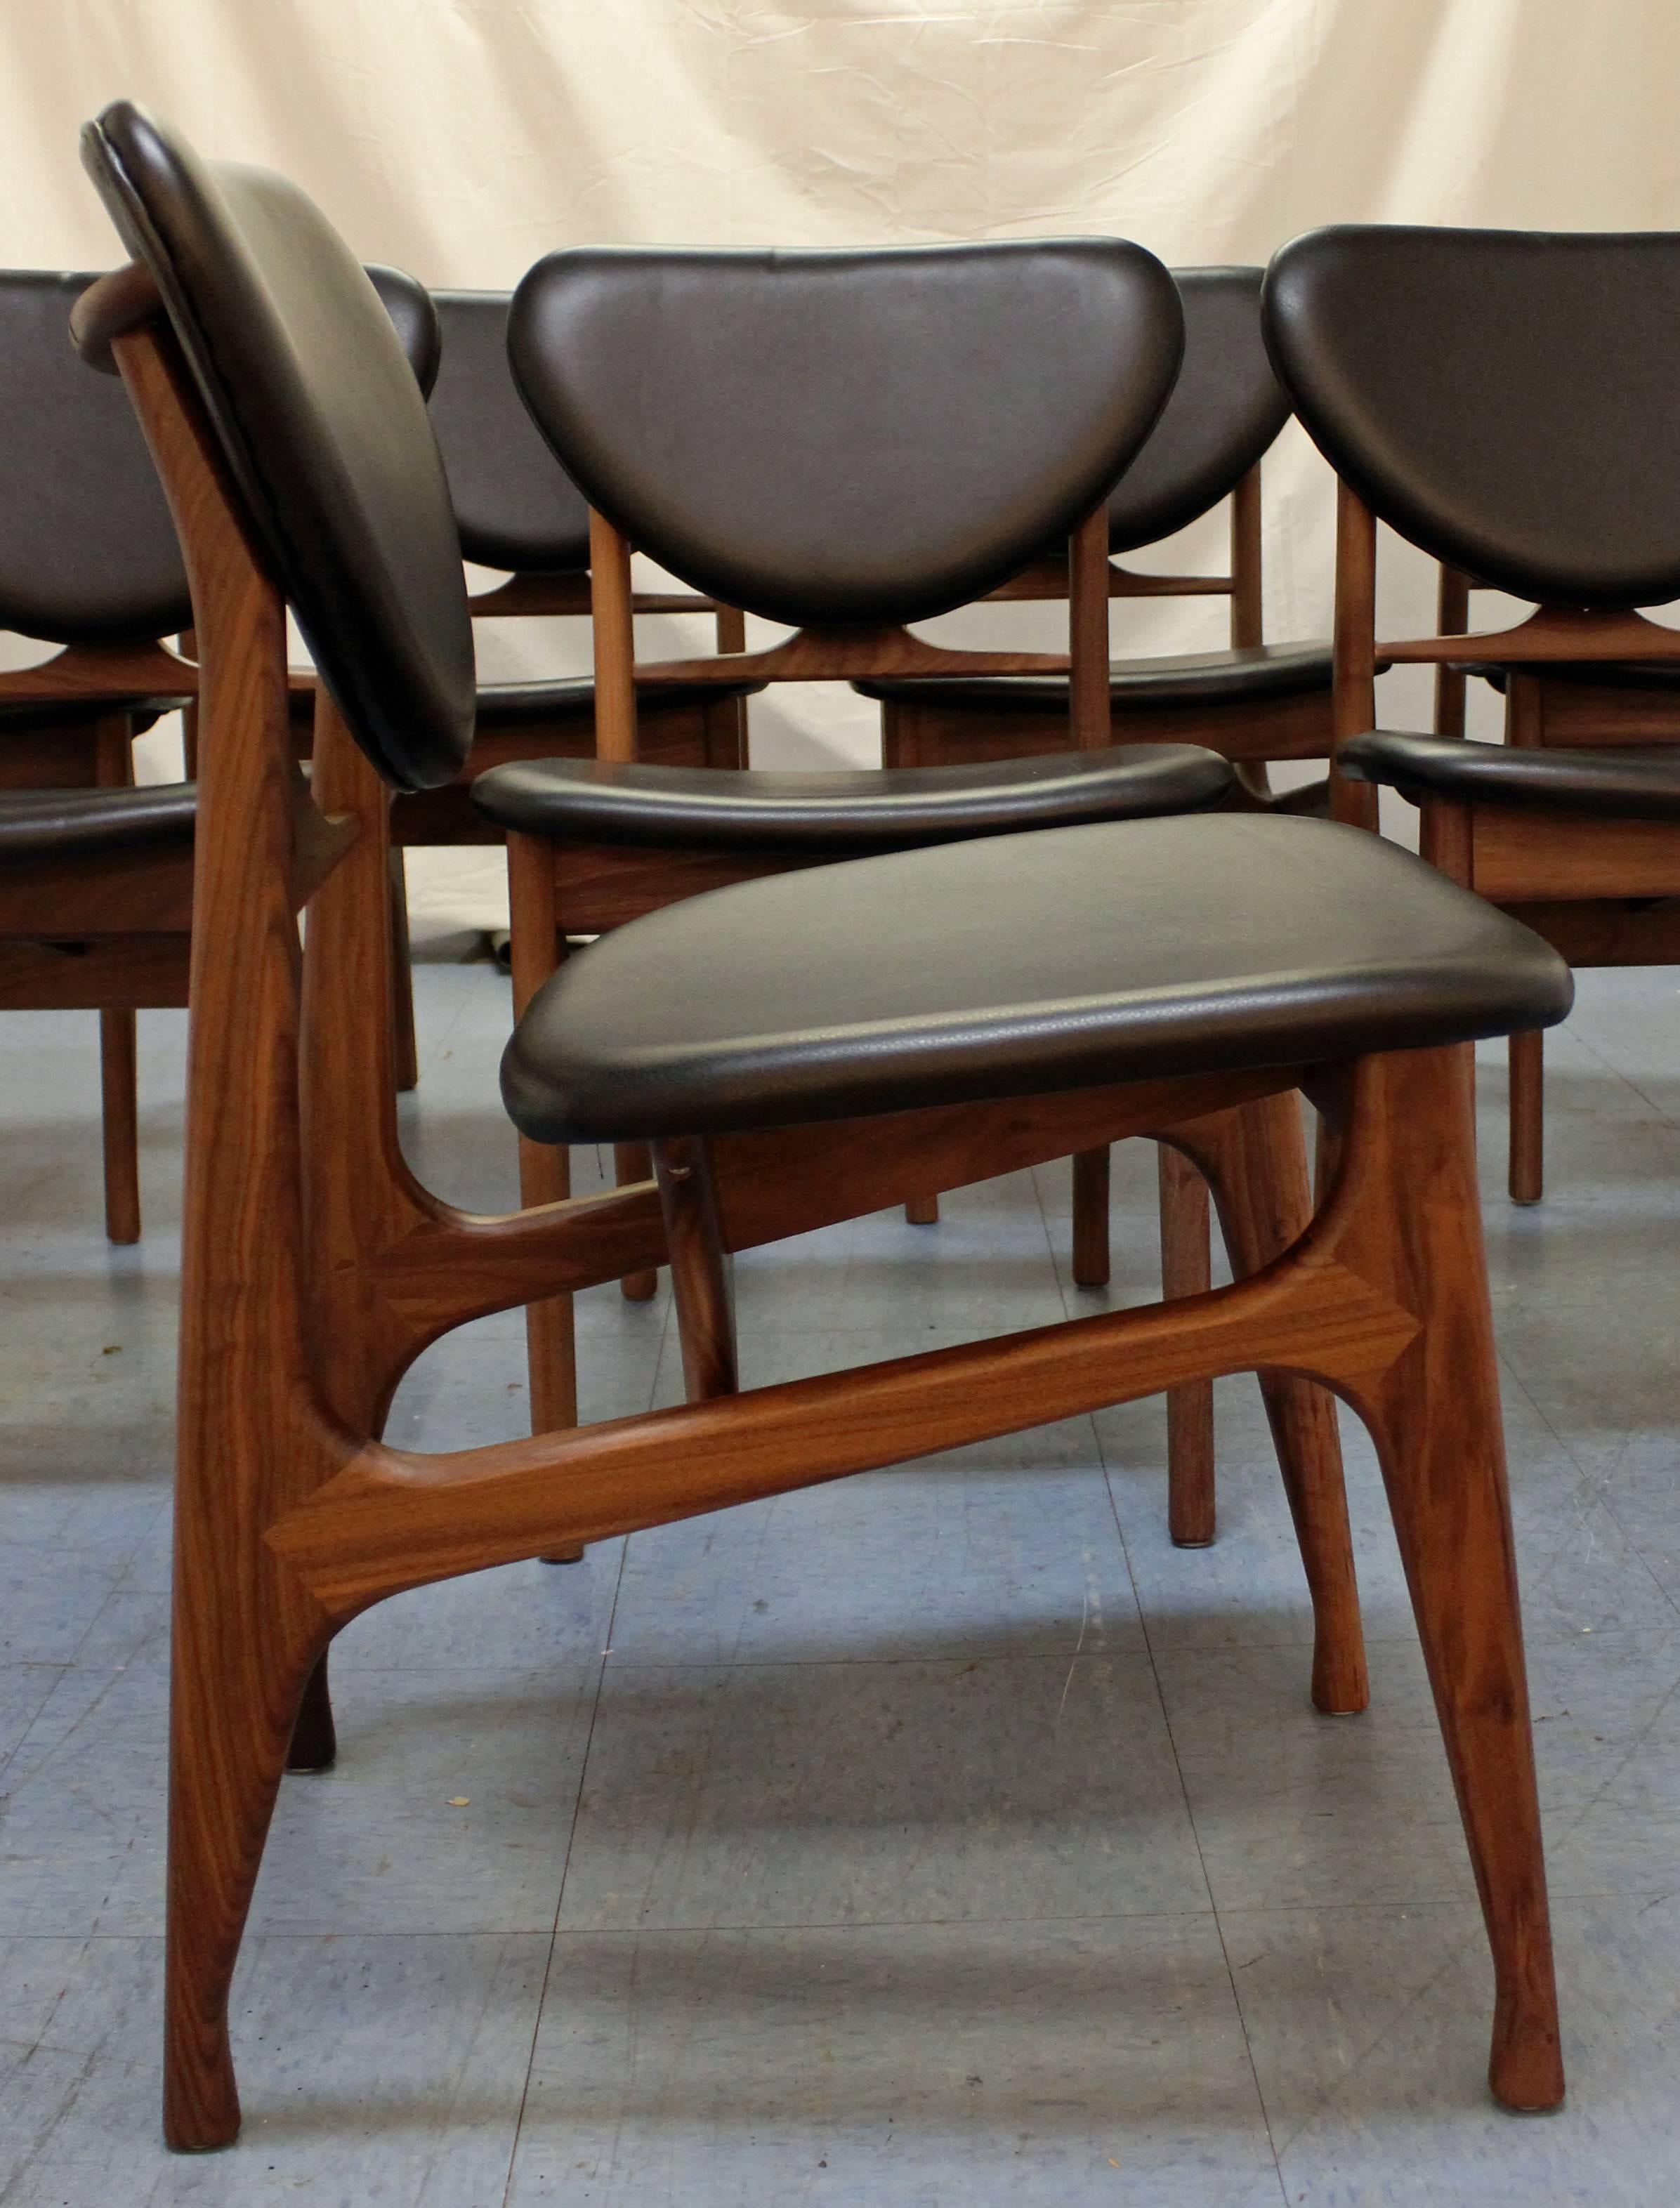 Offered is a set of eight dining chairs Danish Modern Vodder style walnut floating seat dining chairs. The set has great lines and will make a great addition to any room. Includes eight side chairs. They are contemporary reproductions similar in the